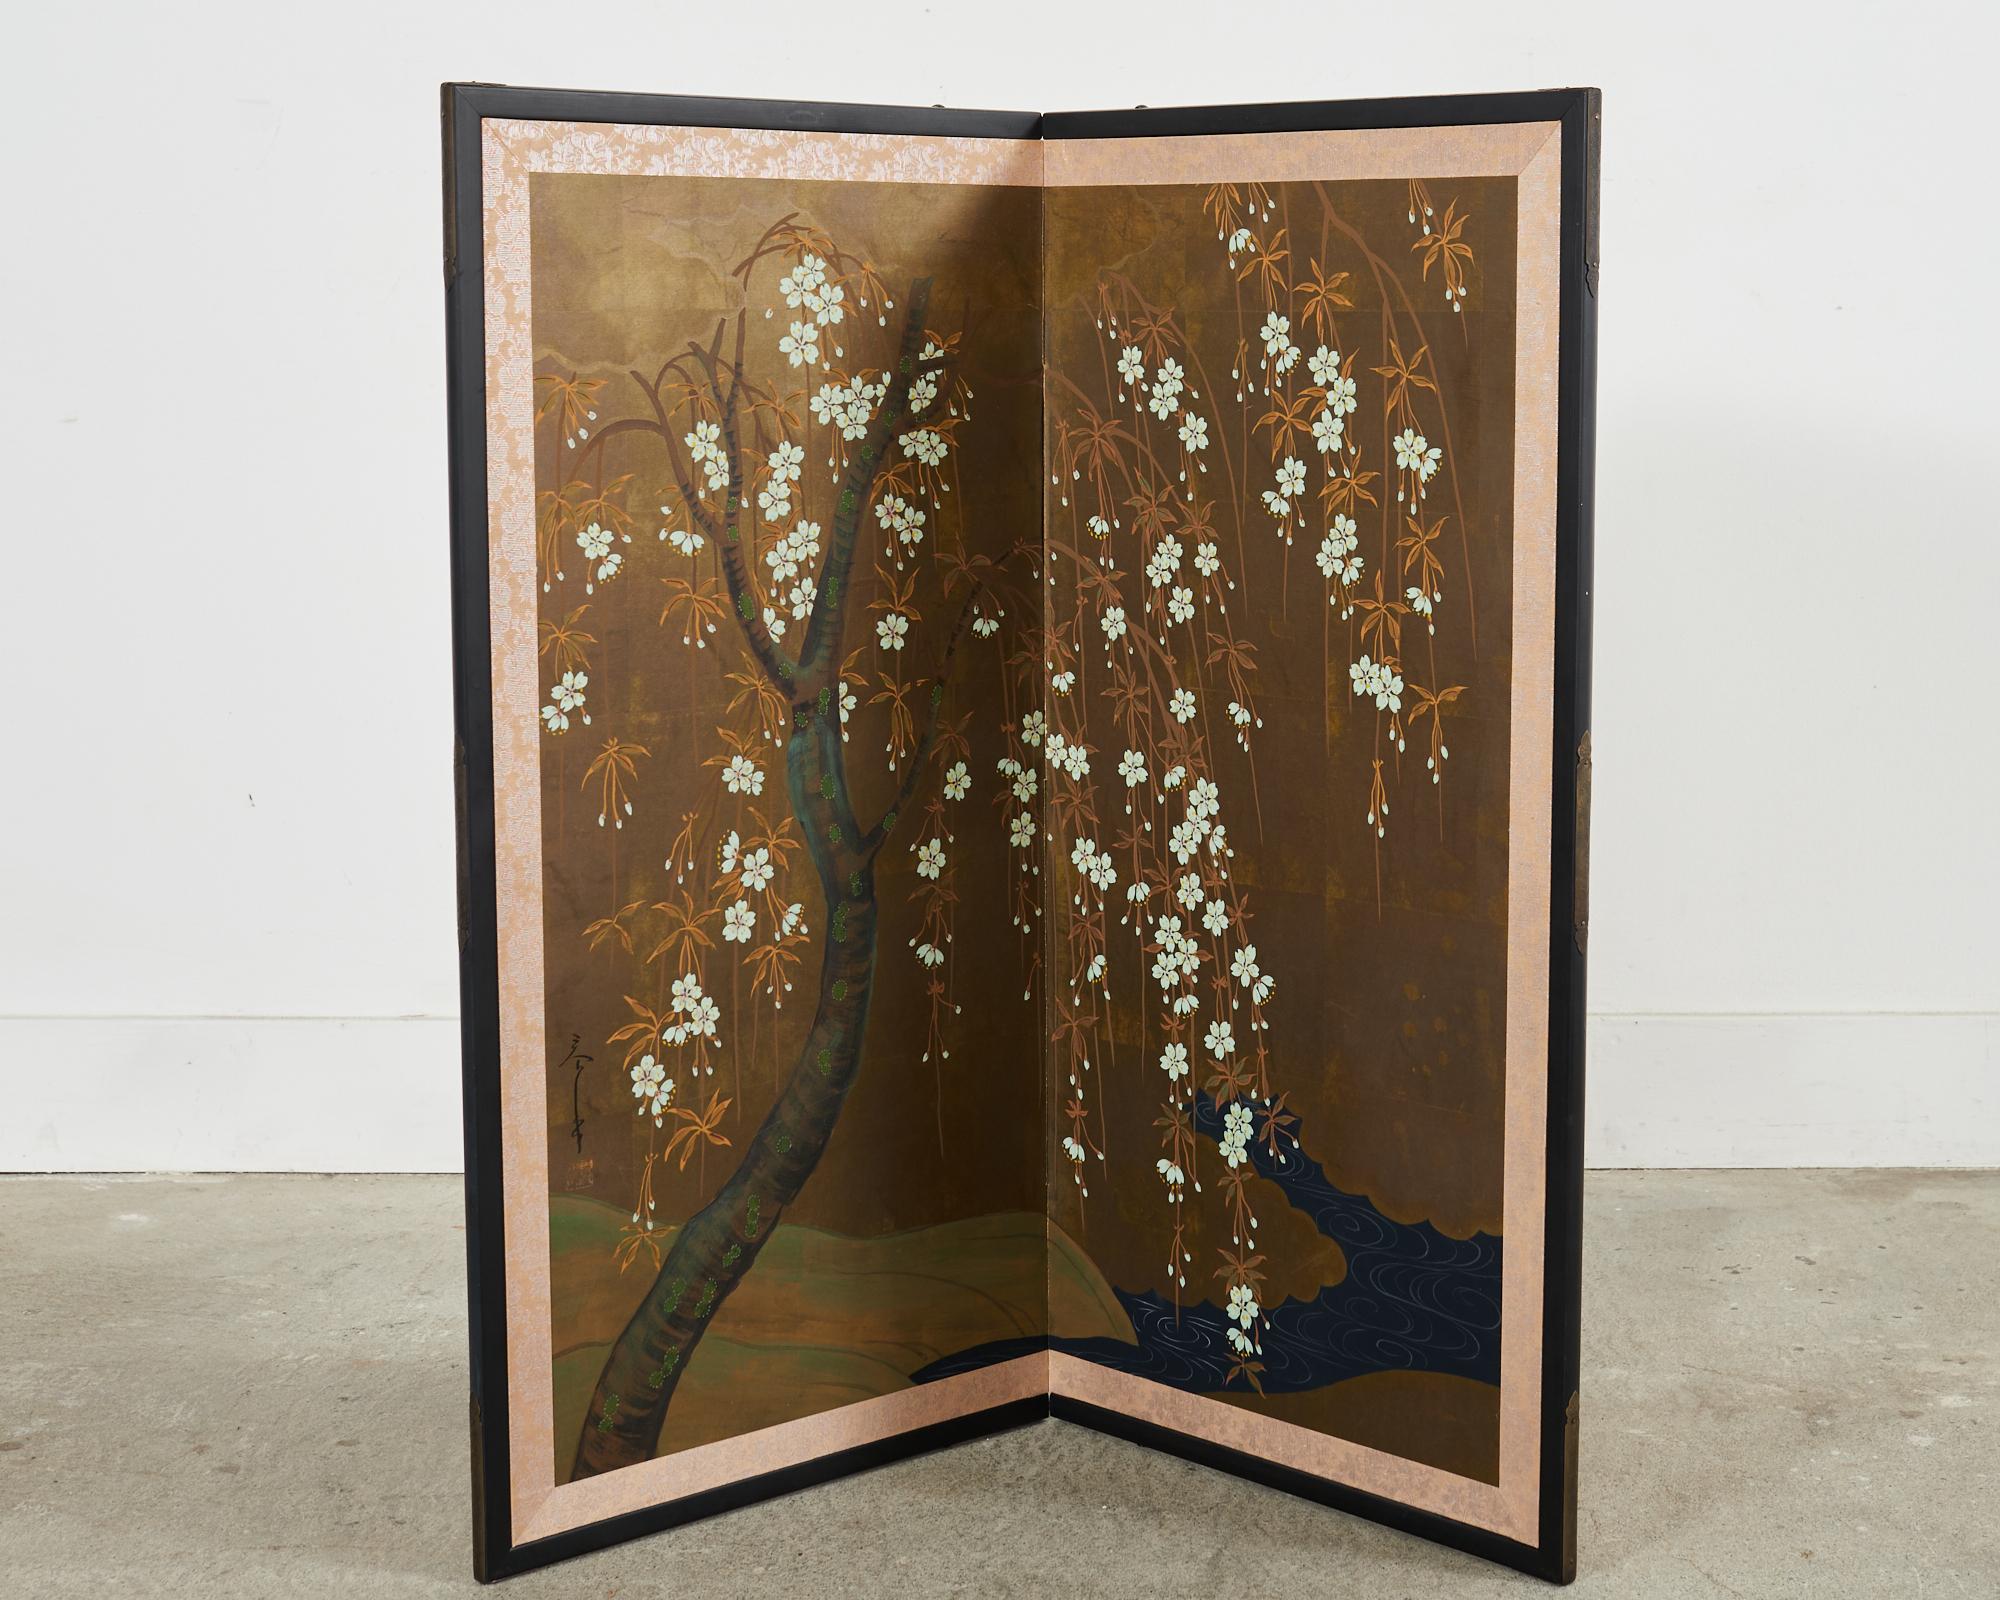 Gorgeous Japanese 20th century Showa period two panel byobu screen depicting a delicate flowering cherry (sakura) tree by a meandering river or stream. Painted with ink and natural color pigments over a gilt square ground. The delicate white